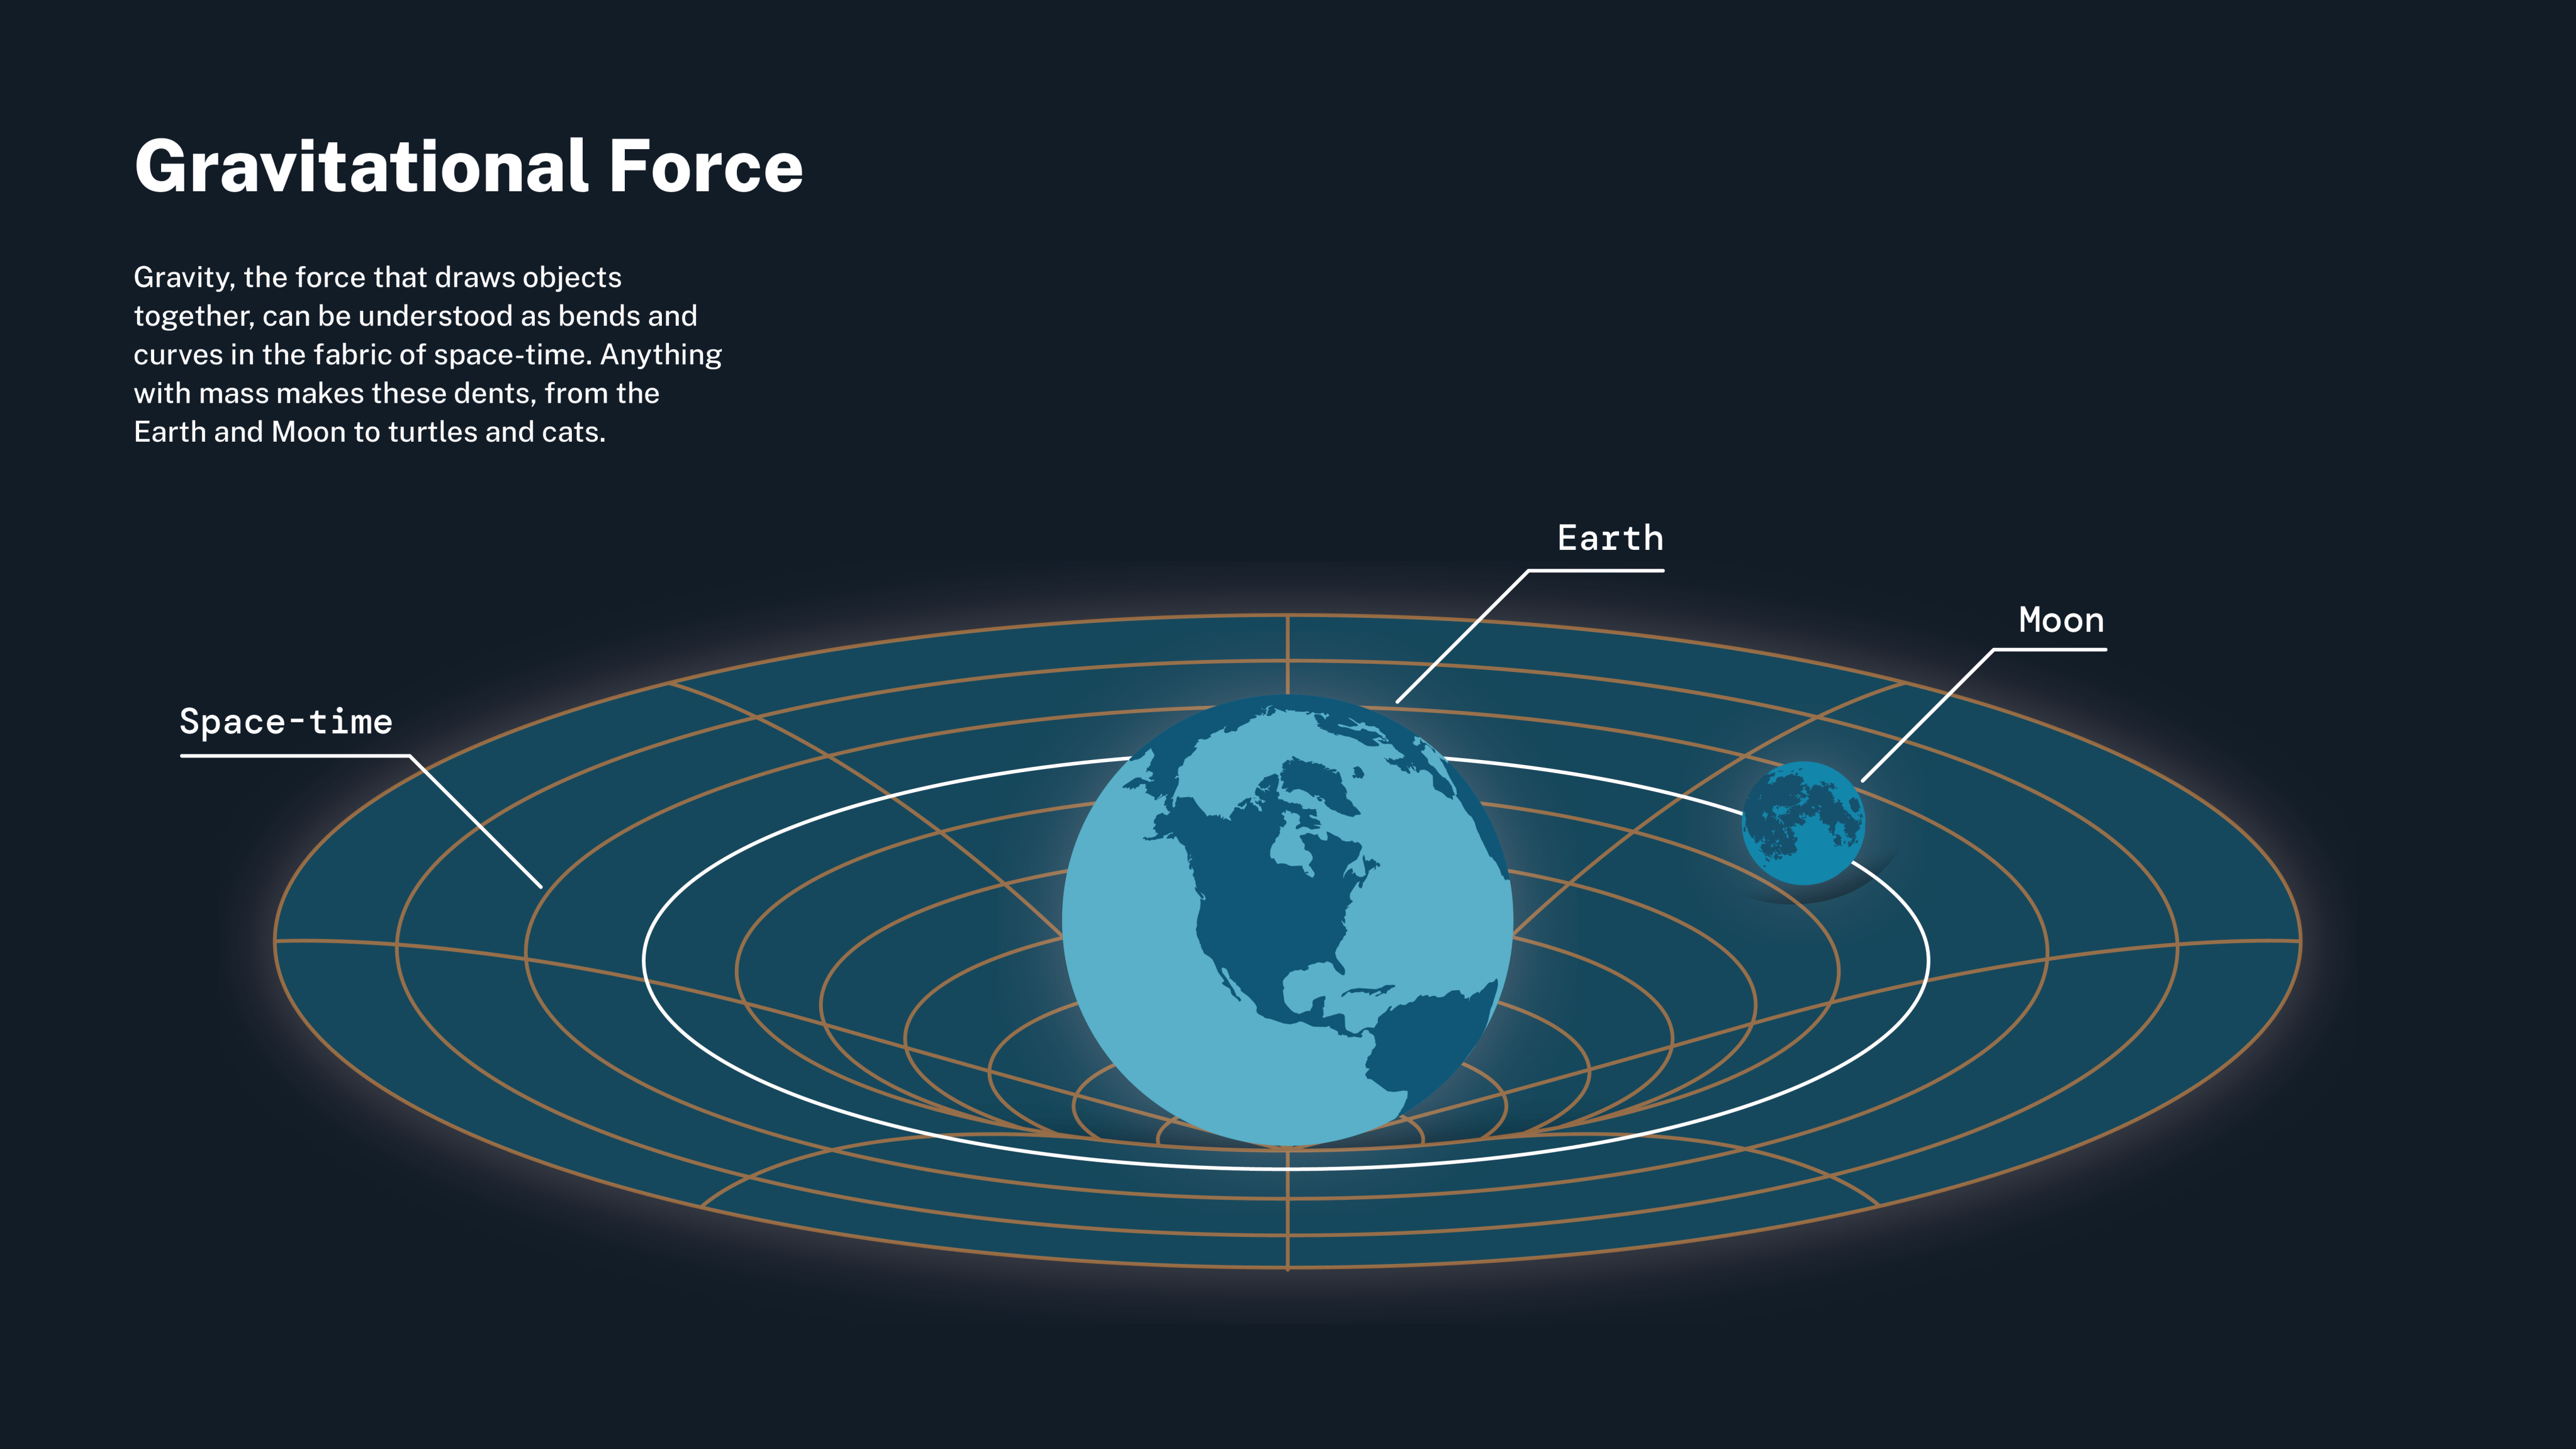 This infographic is done mostly in shades of blue. At the top left is the title: "Gravitational Force." Below that is a block of text that reads: "Gravity, the force that draws objects together, can be understood as bends and curves in the fabric of space-time. Anything with mass makes these dents, from the Earth and Moon to turtles and cats." Below the text, taking up most of the image, is an illustration of Earth and the Moon which is on top of an oval that contains concentric rings outlined in orange representing the fabric of space-time. Directly beneath Earth and the Moon are dips in space-time.